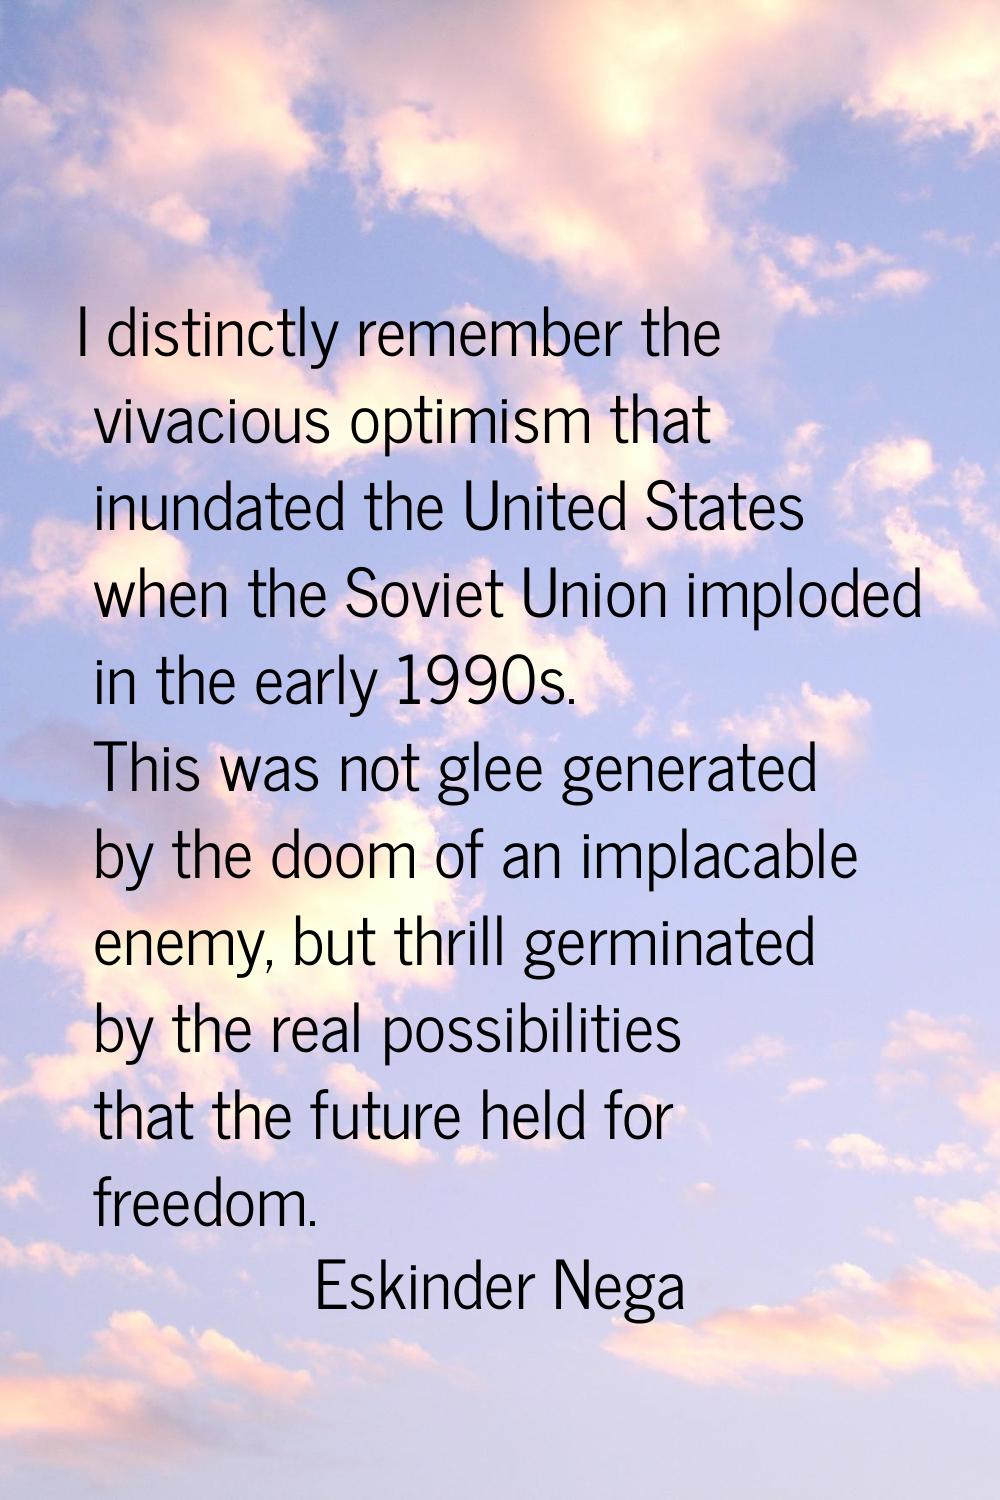 I distinctly remember the vivacious optimism that inundated the United States when the Soviet Union